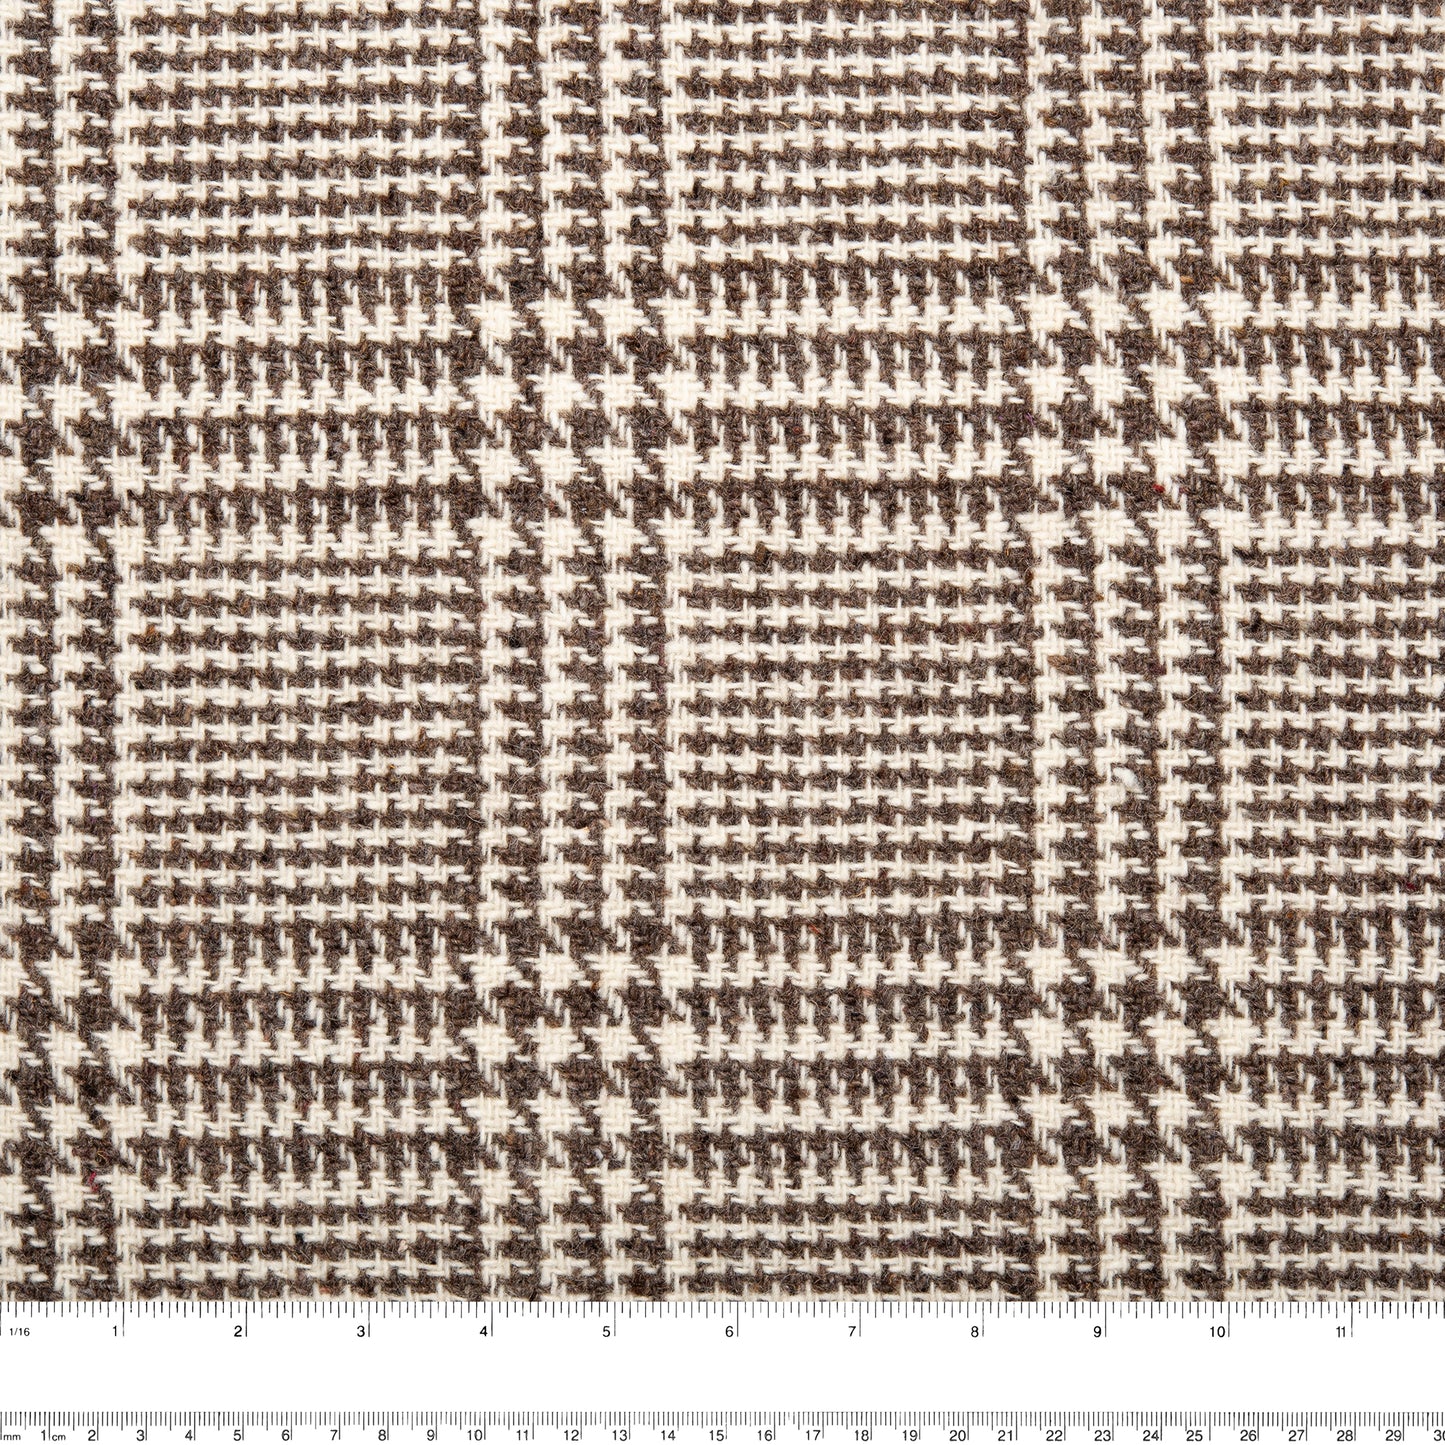 Yarn-dyed wool - ITALIANO - Houndstooth - Off-white / Taupe